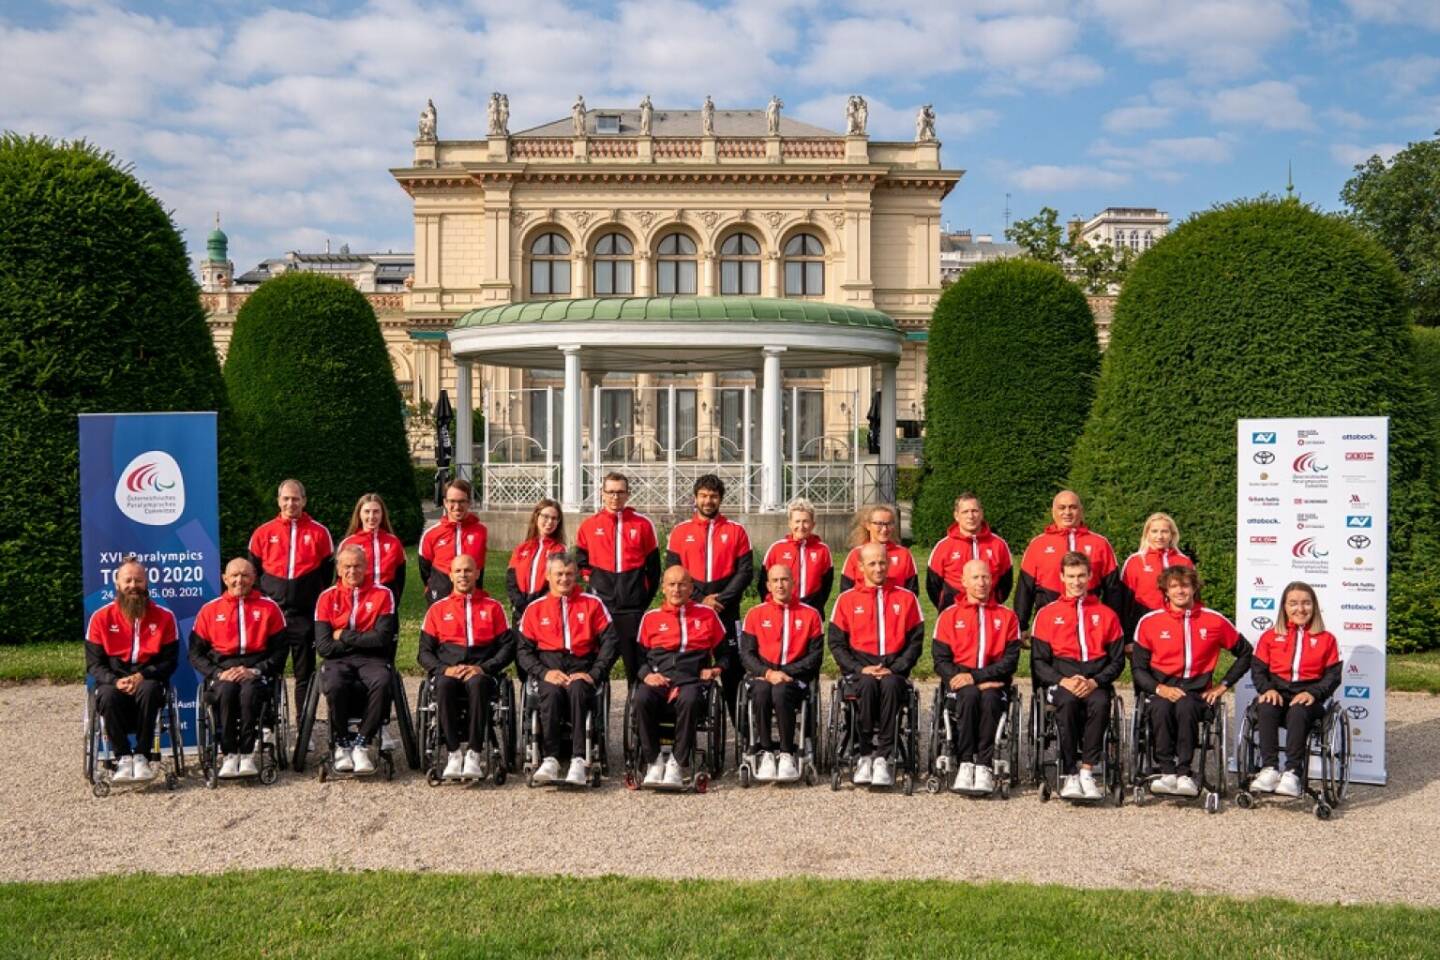 PARALYMPICS - OEPC, Paralympic Summer Games Tokyo 2020, team photo. Image shows first row from left to right: Thomas Geierspichler, Walter Ablinger, Martin Legner, Thomas Flax, Josef Riegler, Ernst Bachmaier, Thomas Fruehwirth, Florian Brungraber, Alexander Gritsch, Andreas Ernhofer, Nicolas Langmann and Elisabeth Egger (AUT). Second row from left to right: Bernd Brugger, Valentina Strobl, Andreas Onea, Julia Sciancalepore, Guenther Matzinger, Markus Mendy Swoboda, Yvonne Marzinke, Janina Falk, Krisztian Gardos, Bil Marinkovic and Natalija Eder (AUT). Photo: GEPA pictures/ Johannes Friedl